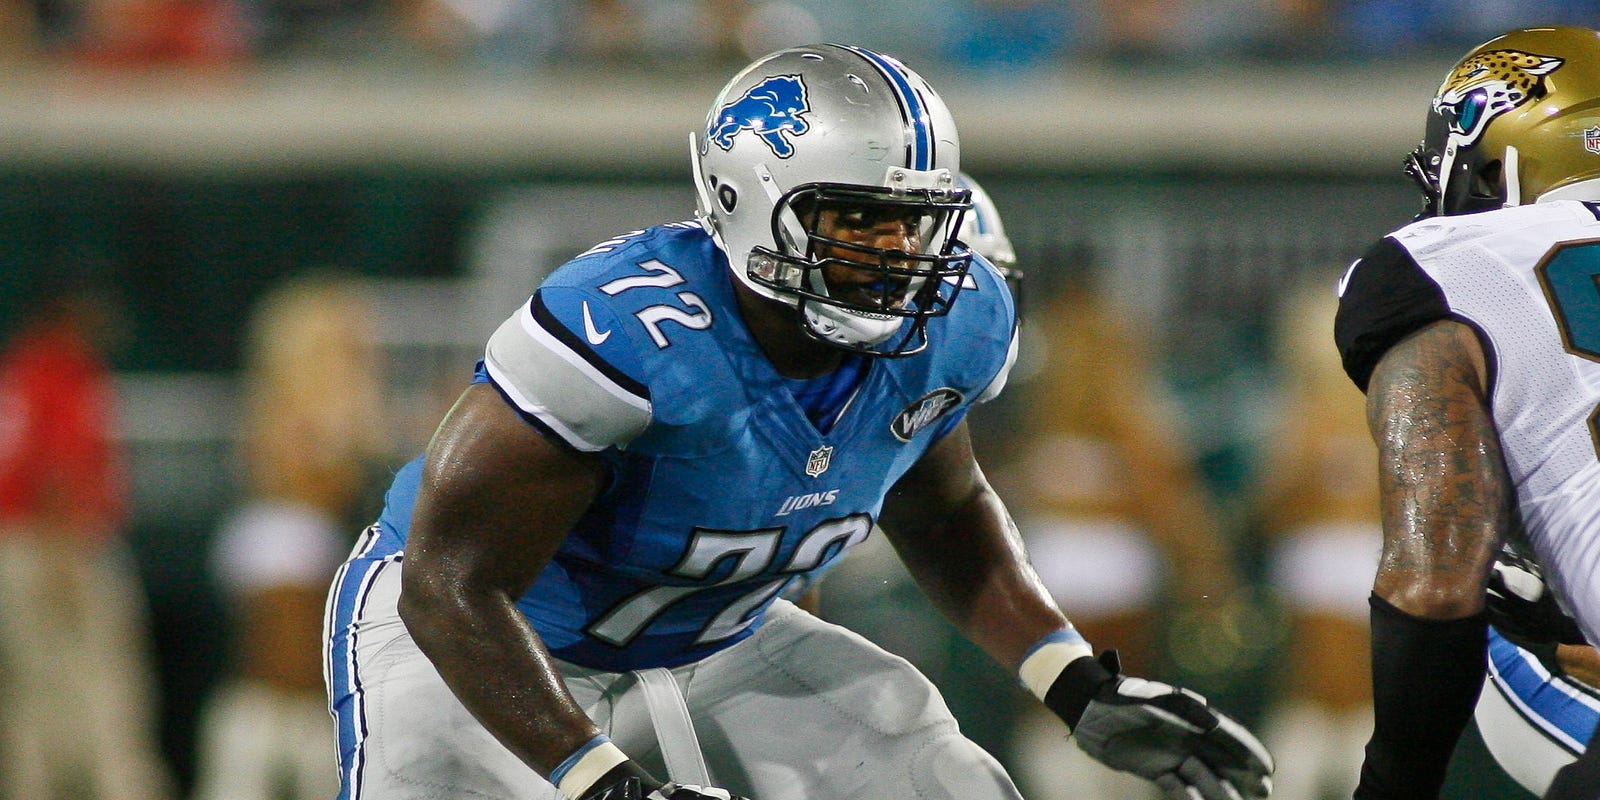 Detroit Lions notes: Laken Tomlinson ahead of expectations